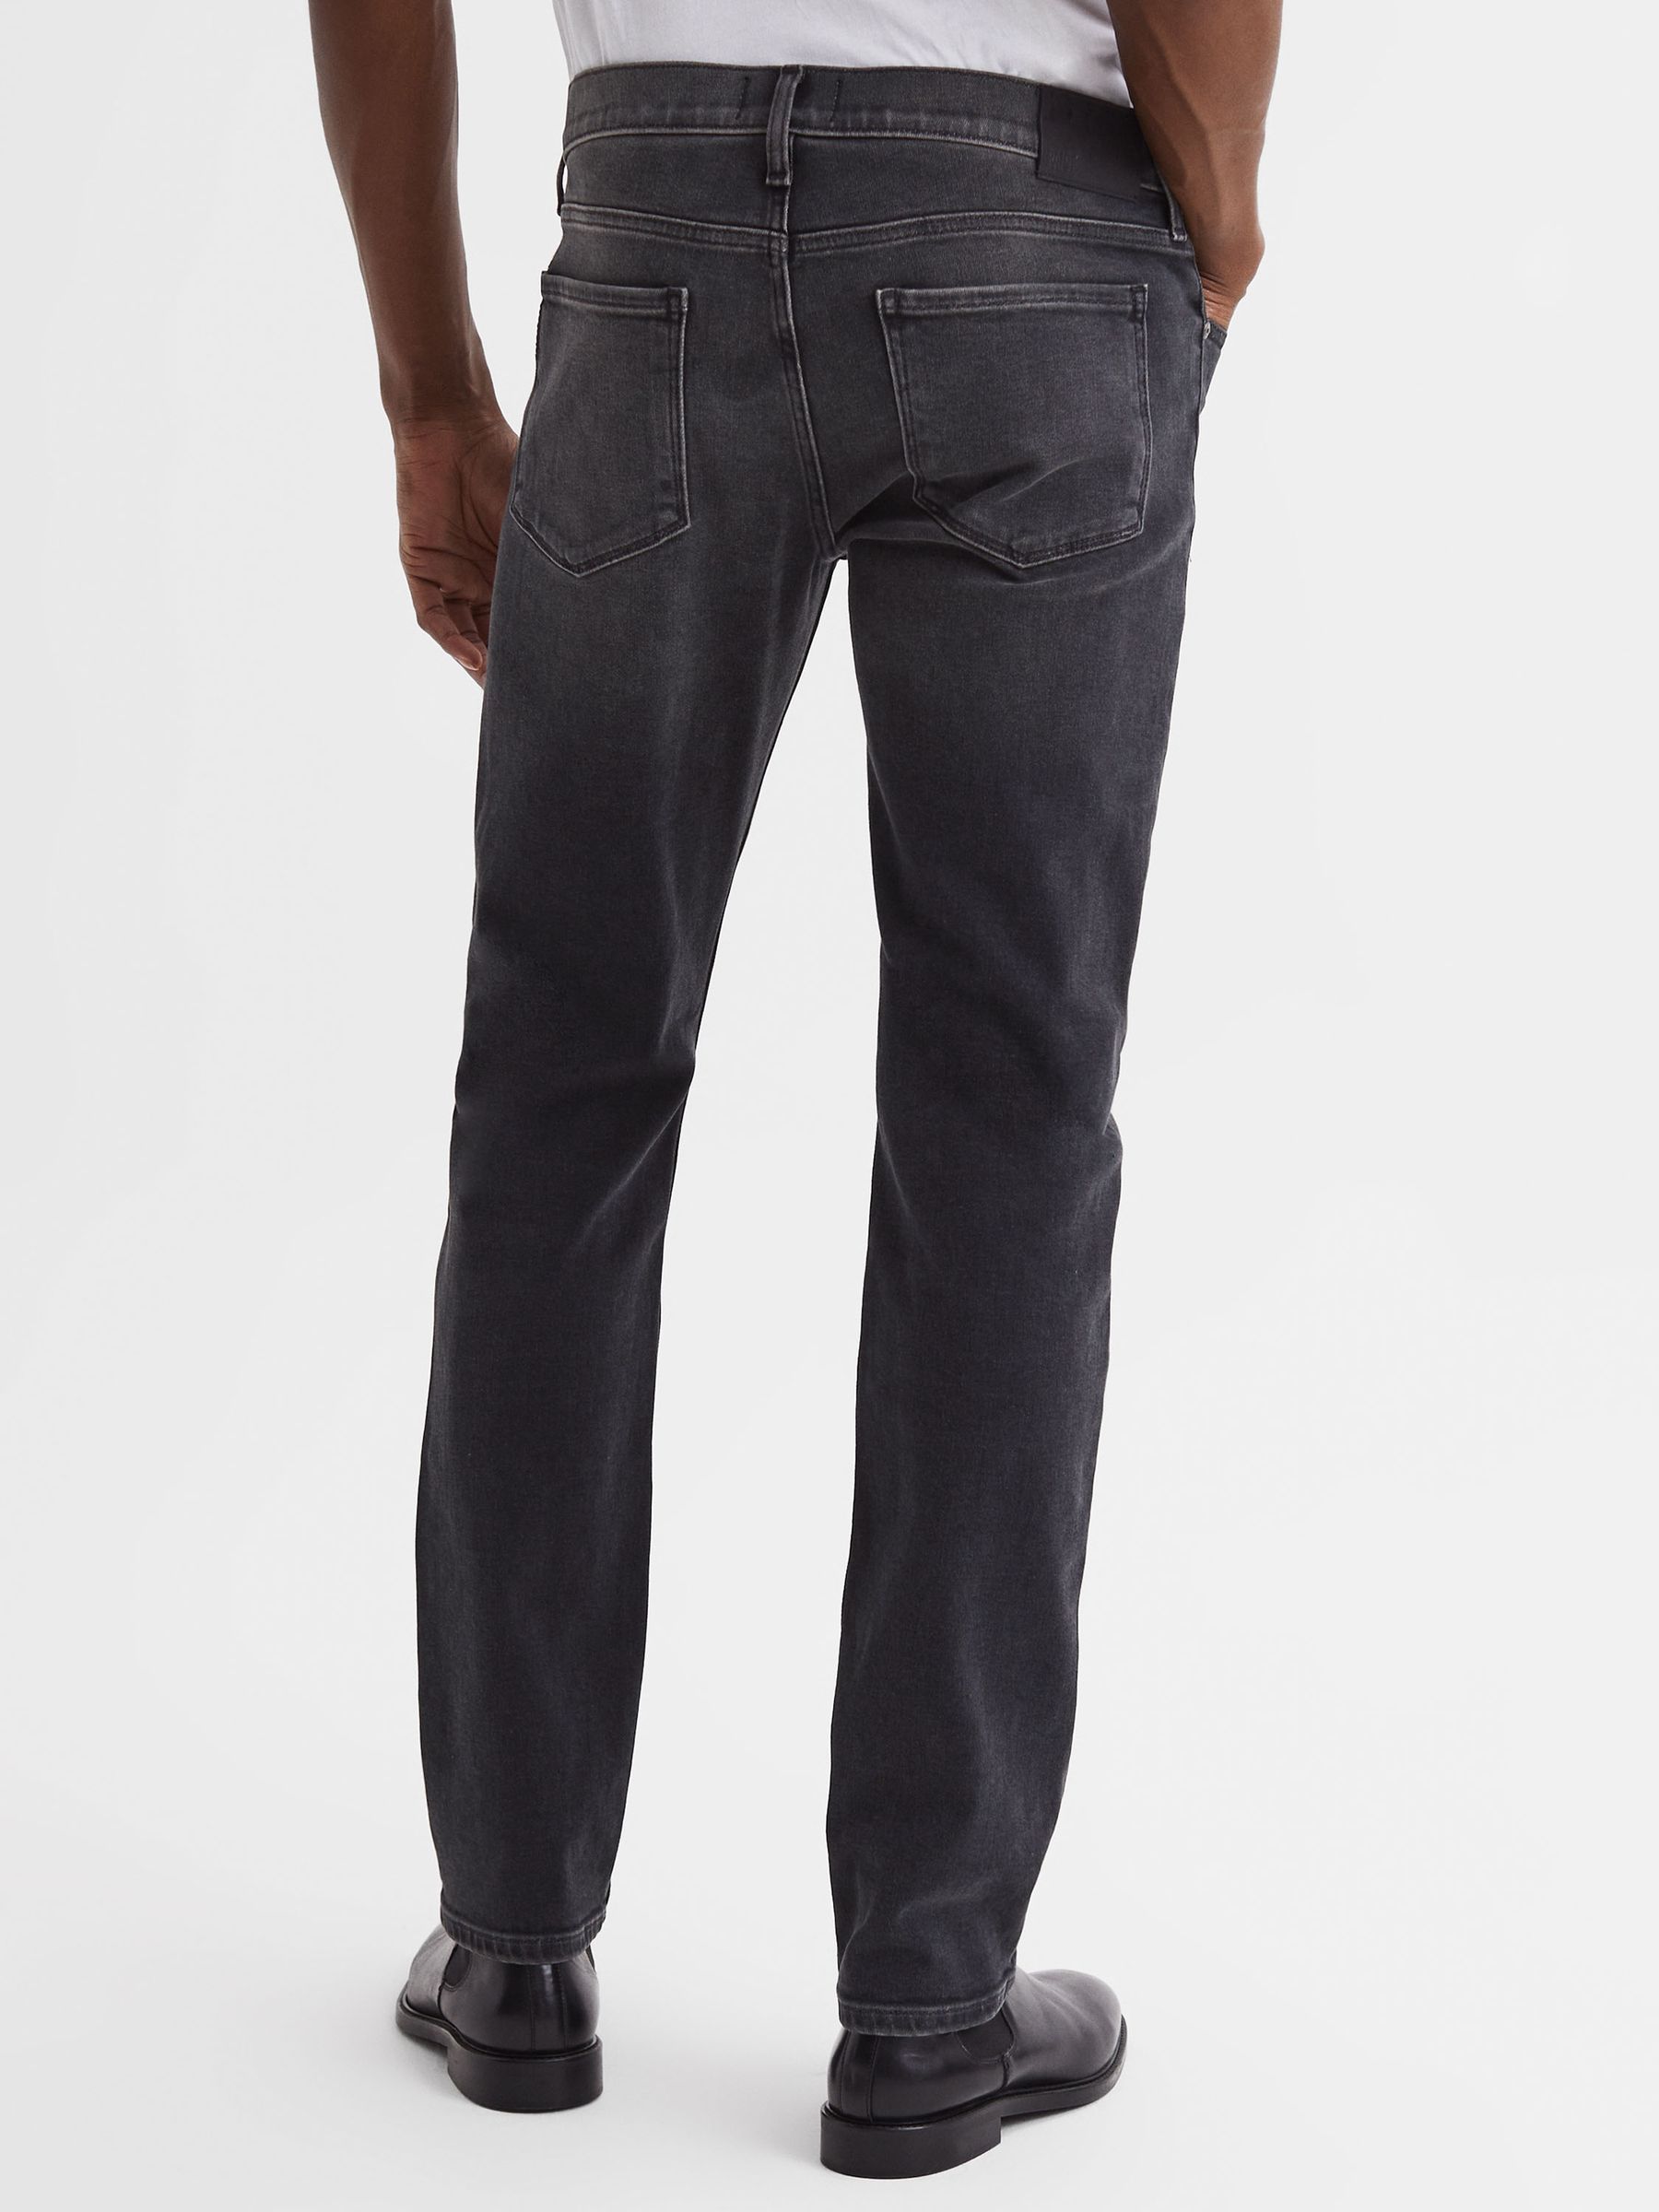 Paige High Stretch Slim Fit Jeans - REISS